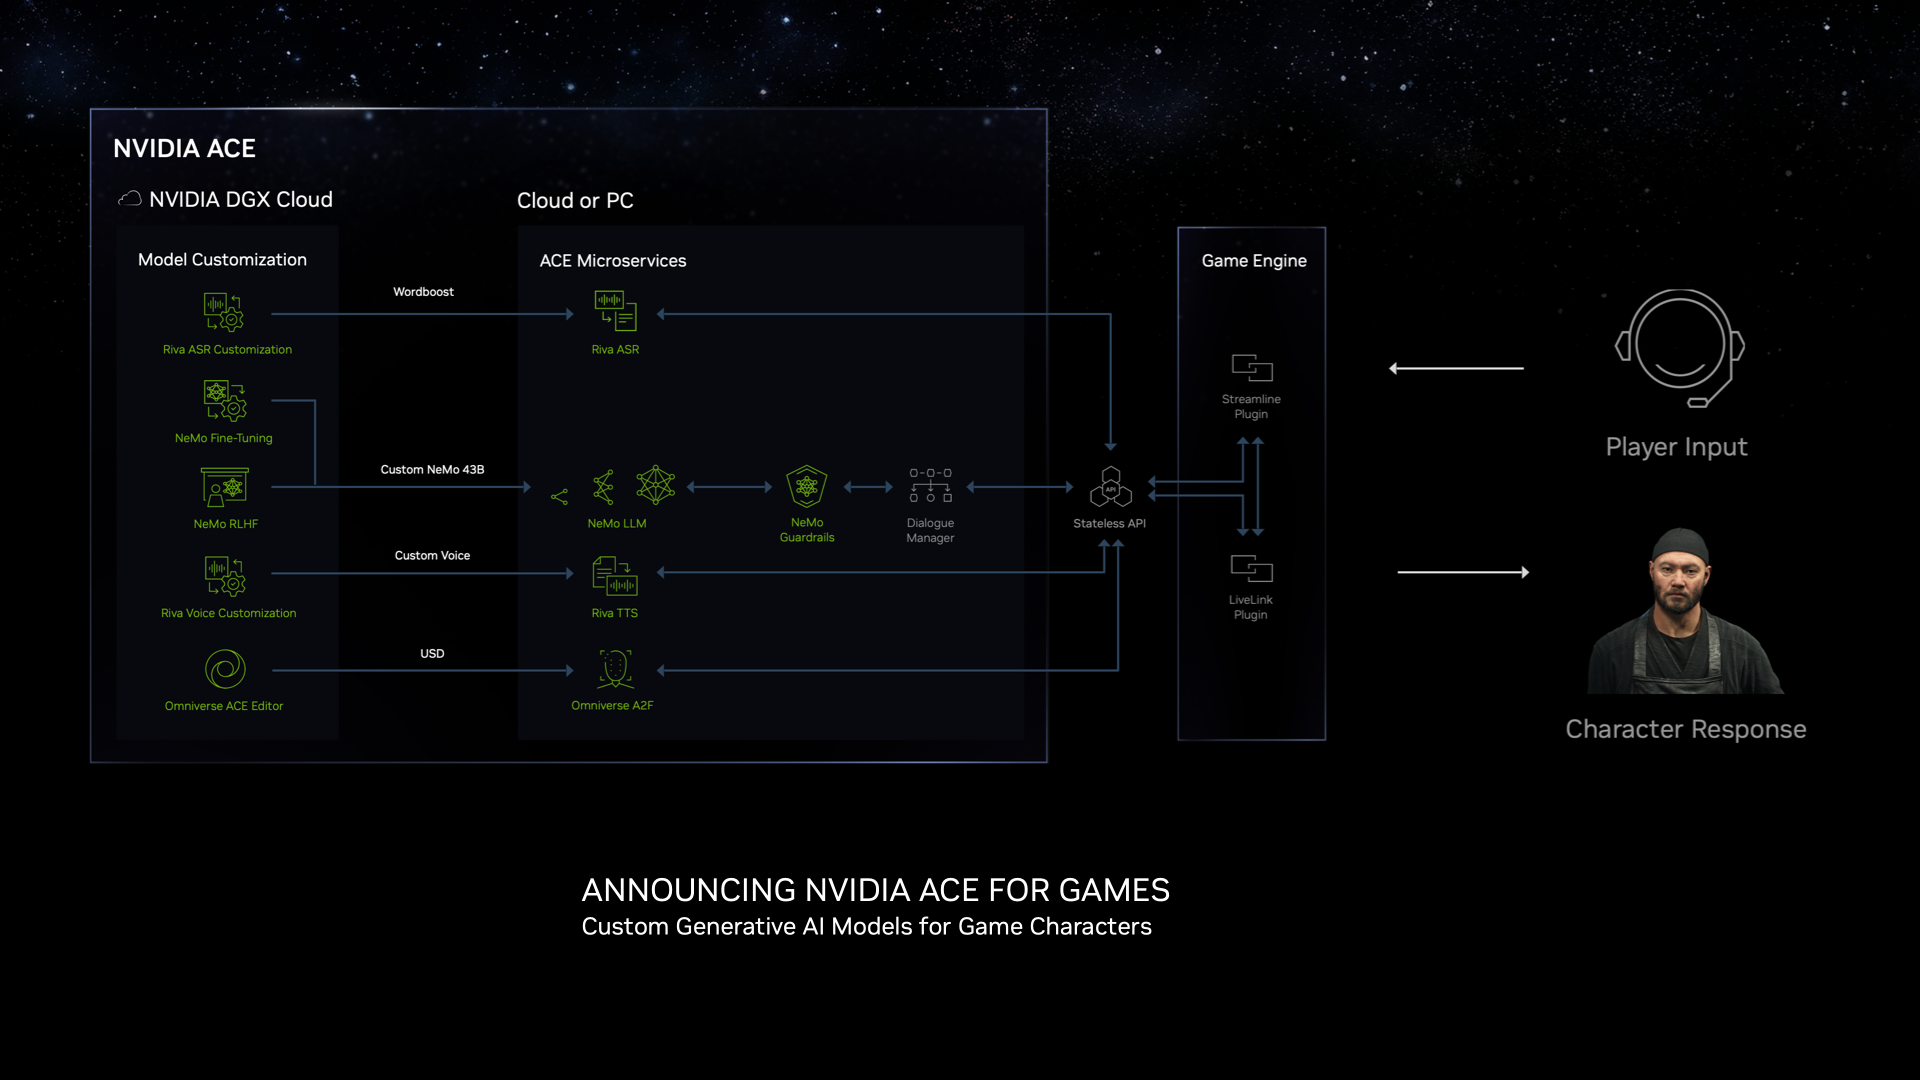 Graphic showing modules of NVIDIA ACE for Games.